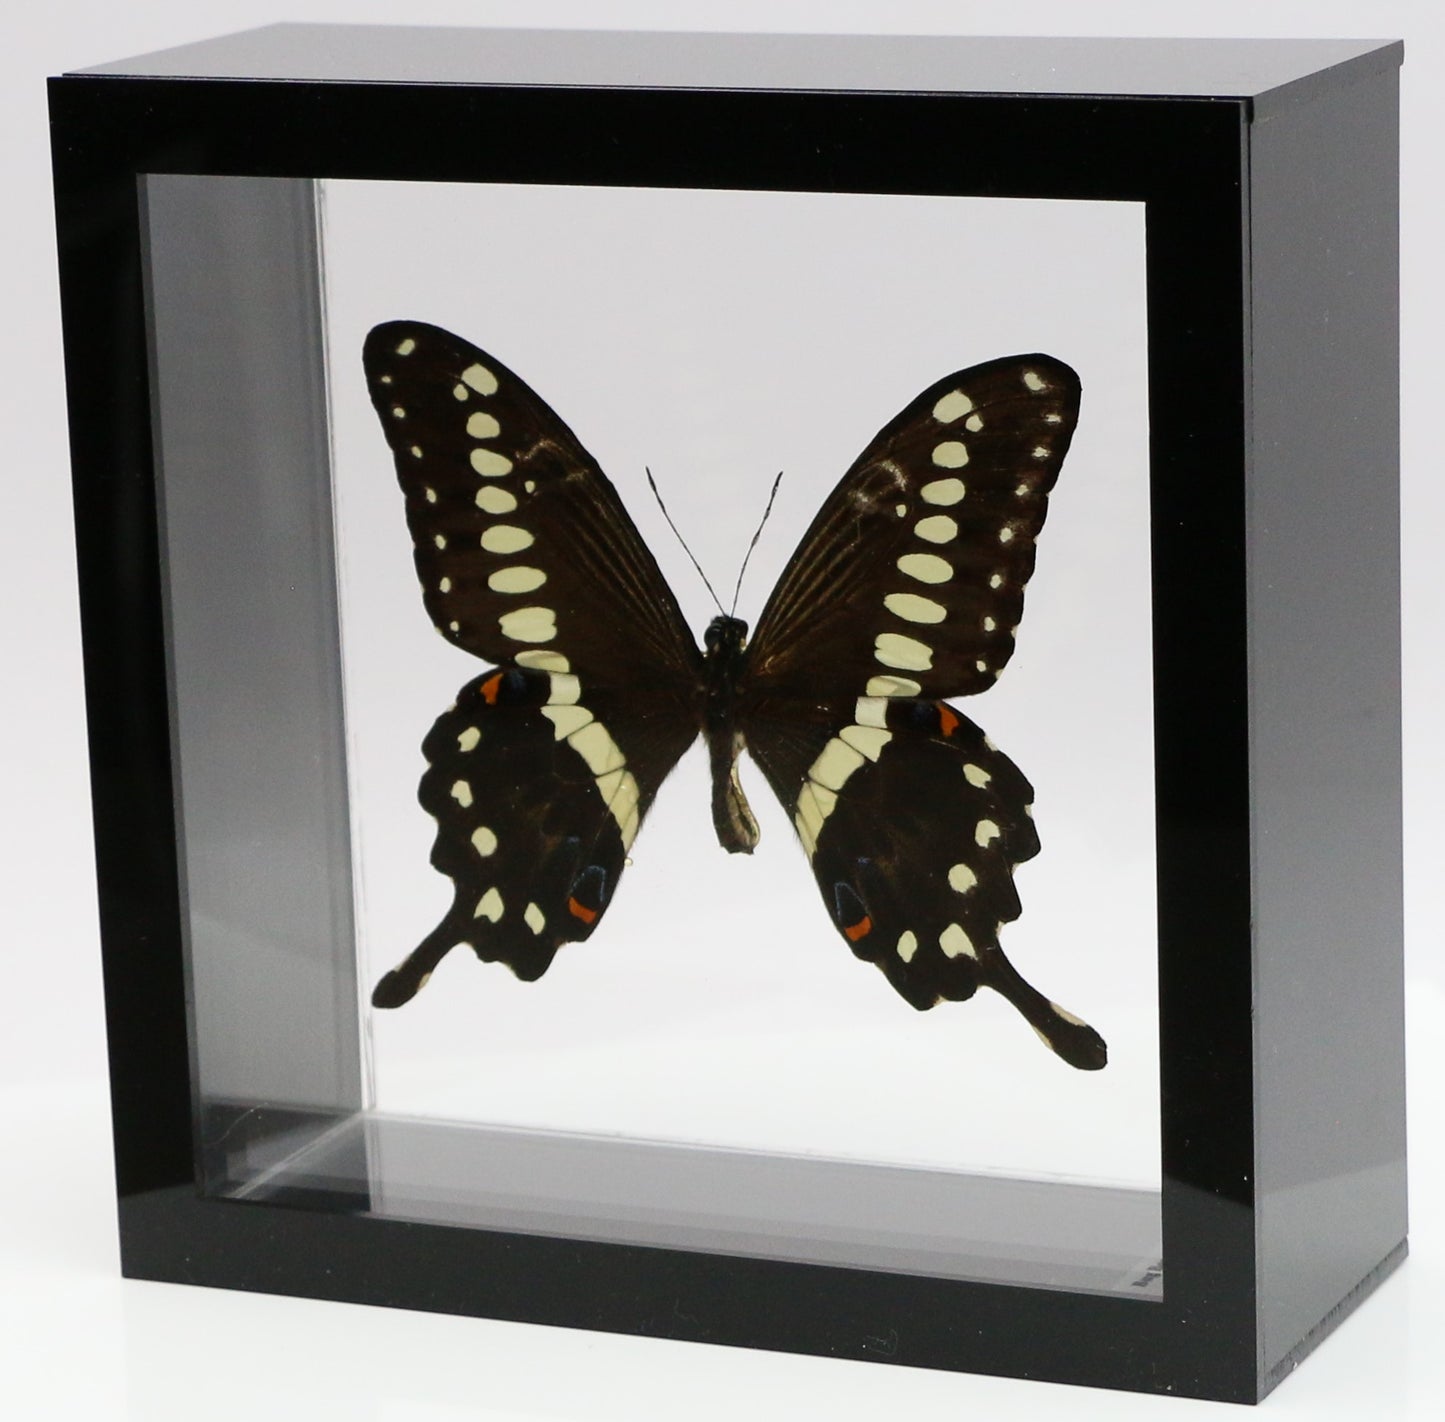 9060617 - Real Butterfly Acrylic Display Box - 6" X 6" - African Giant Swallowtail (Papilio lormieri)